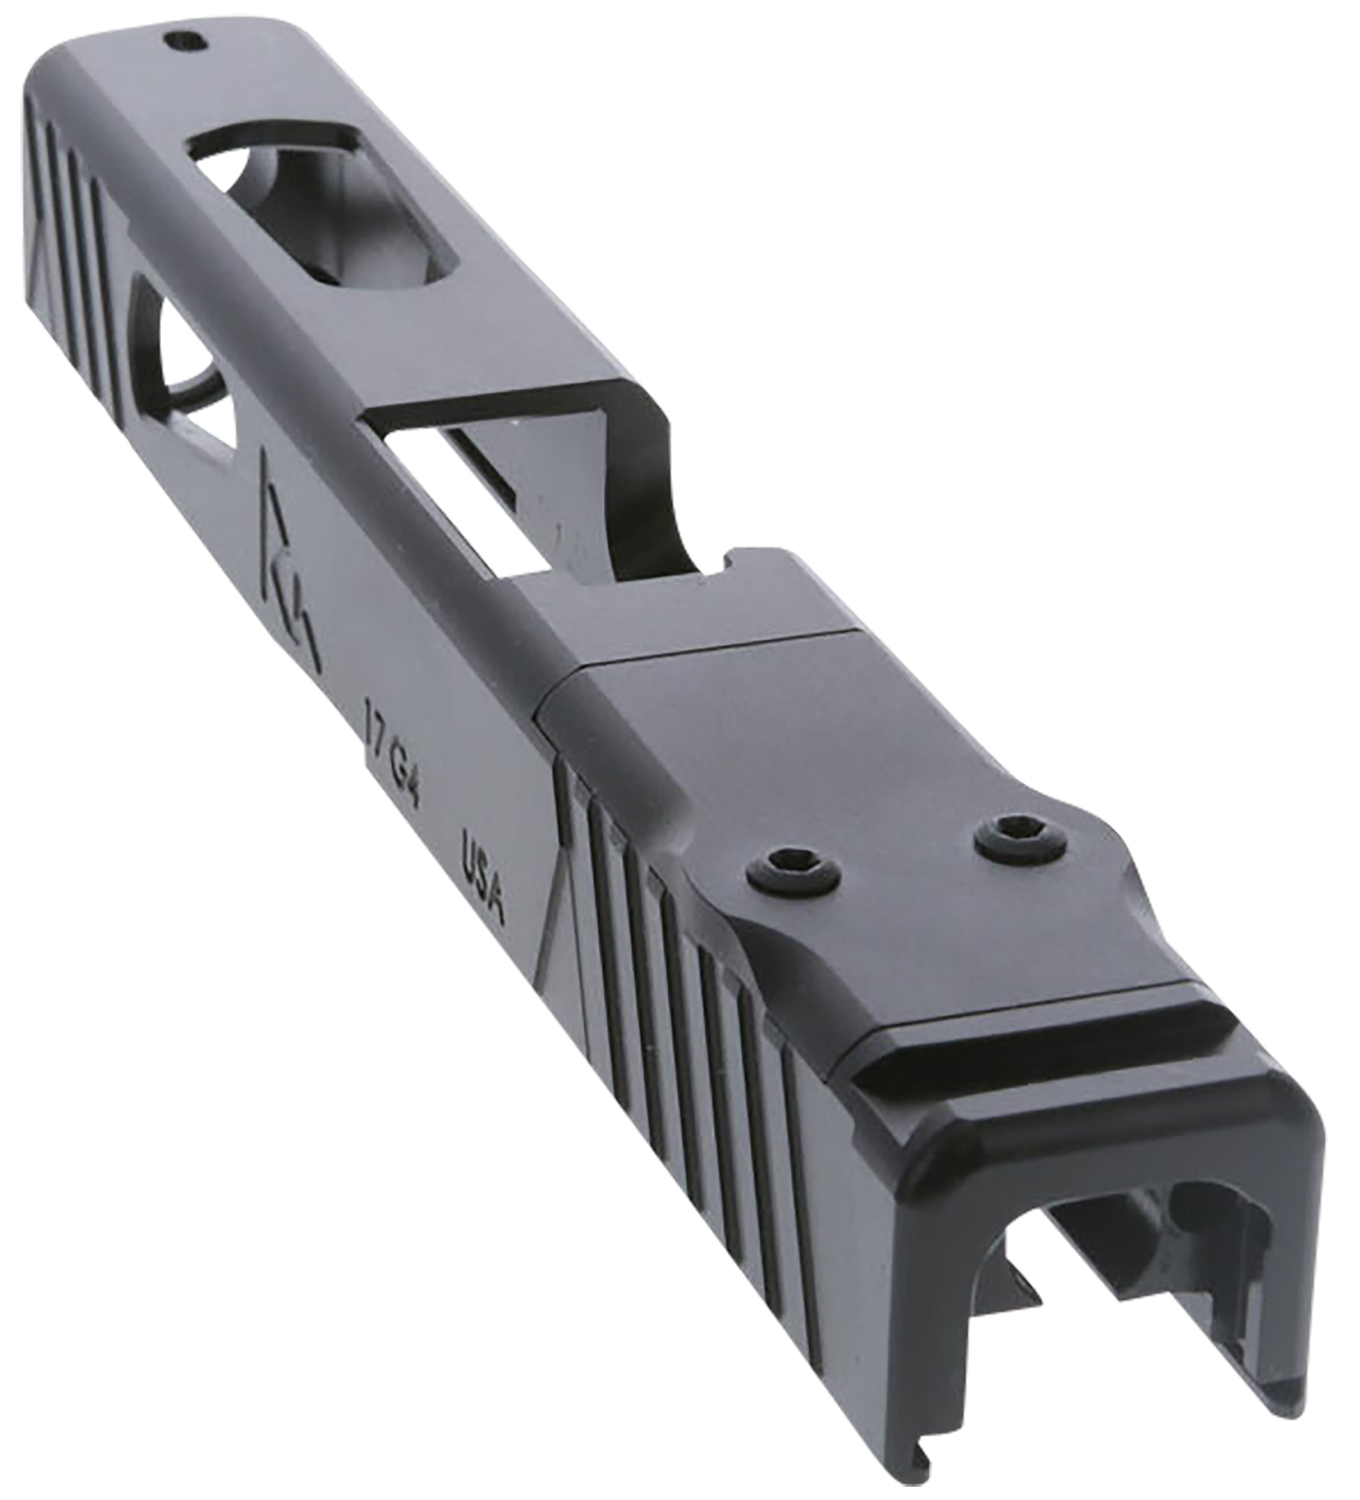 Rival Arms RA10G104A Precision Slide A1 QPQ Black 17-4 Stainless Steel with Front/Rear Serrations & RMR Optic cut for 9mm Luger Glock 17 Gen4